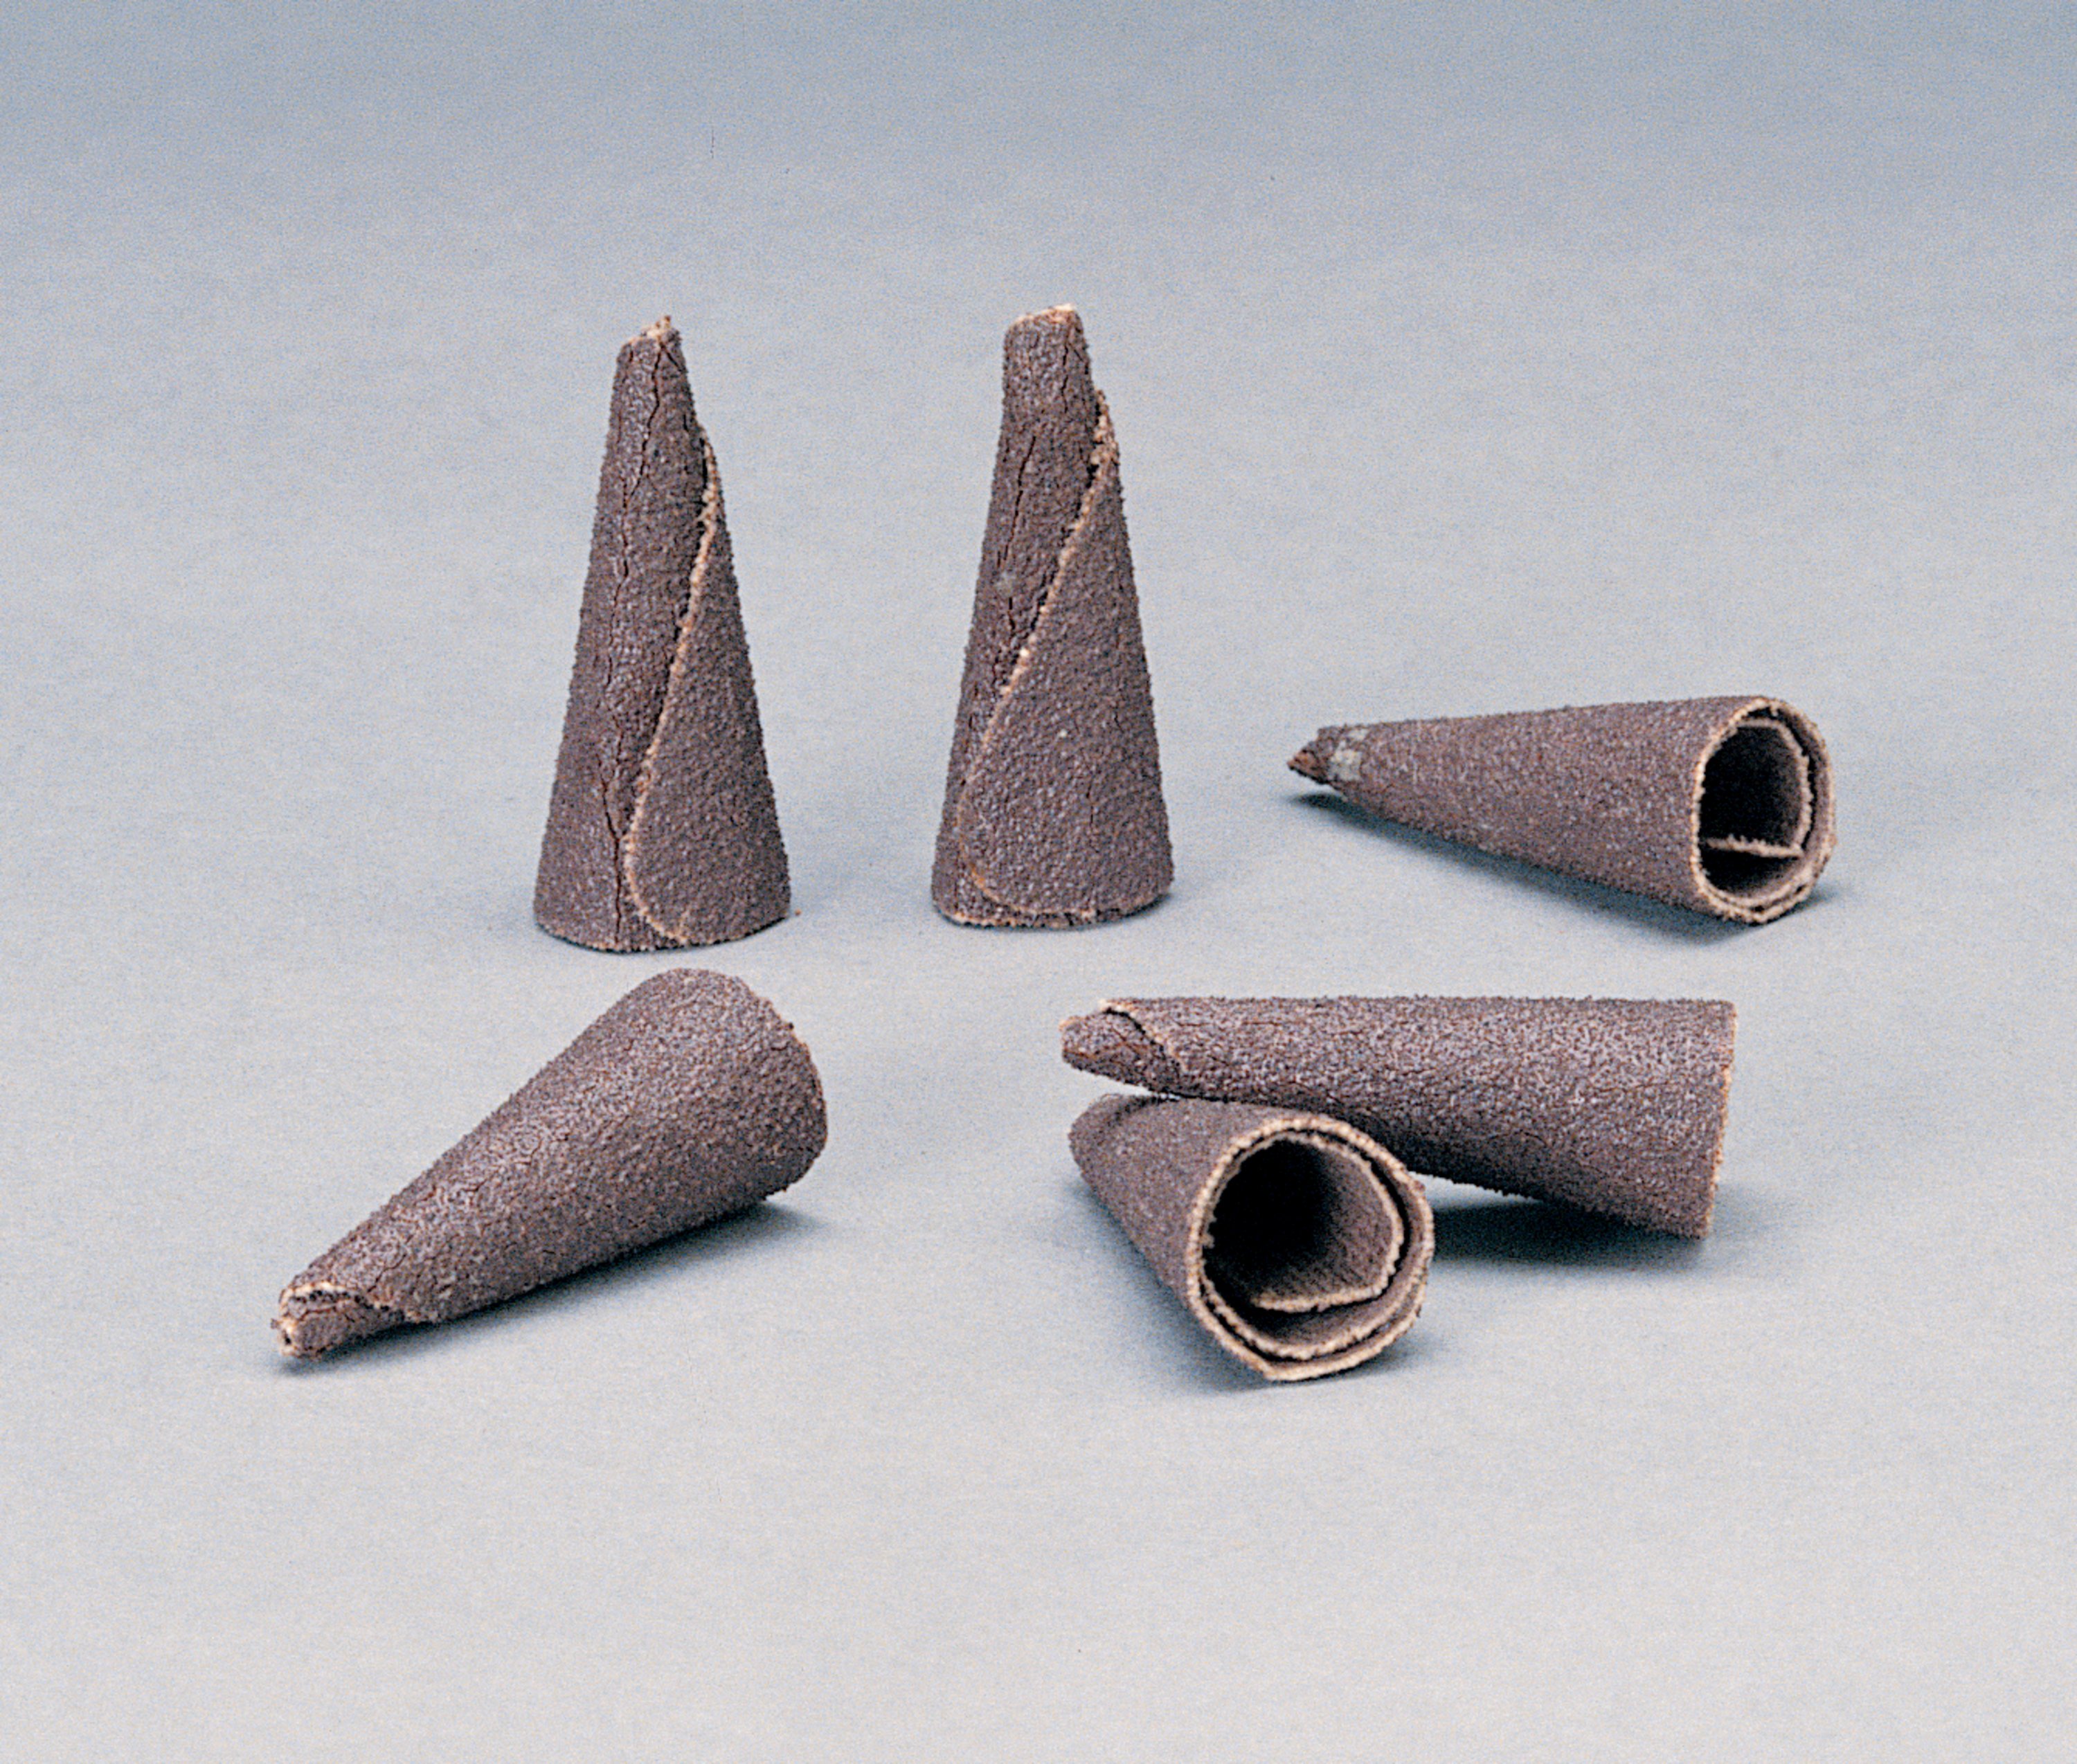 Often used in critical production and maintenance operations, as well as low-pressure blending, polishing, cleaning and deburring, tapered Cone Points offer easy accessibility to tight areas for more precise grinding.